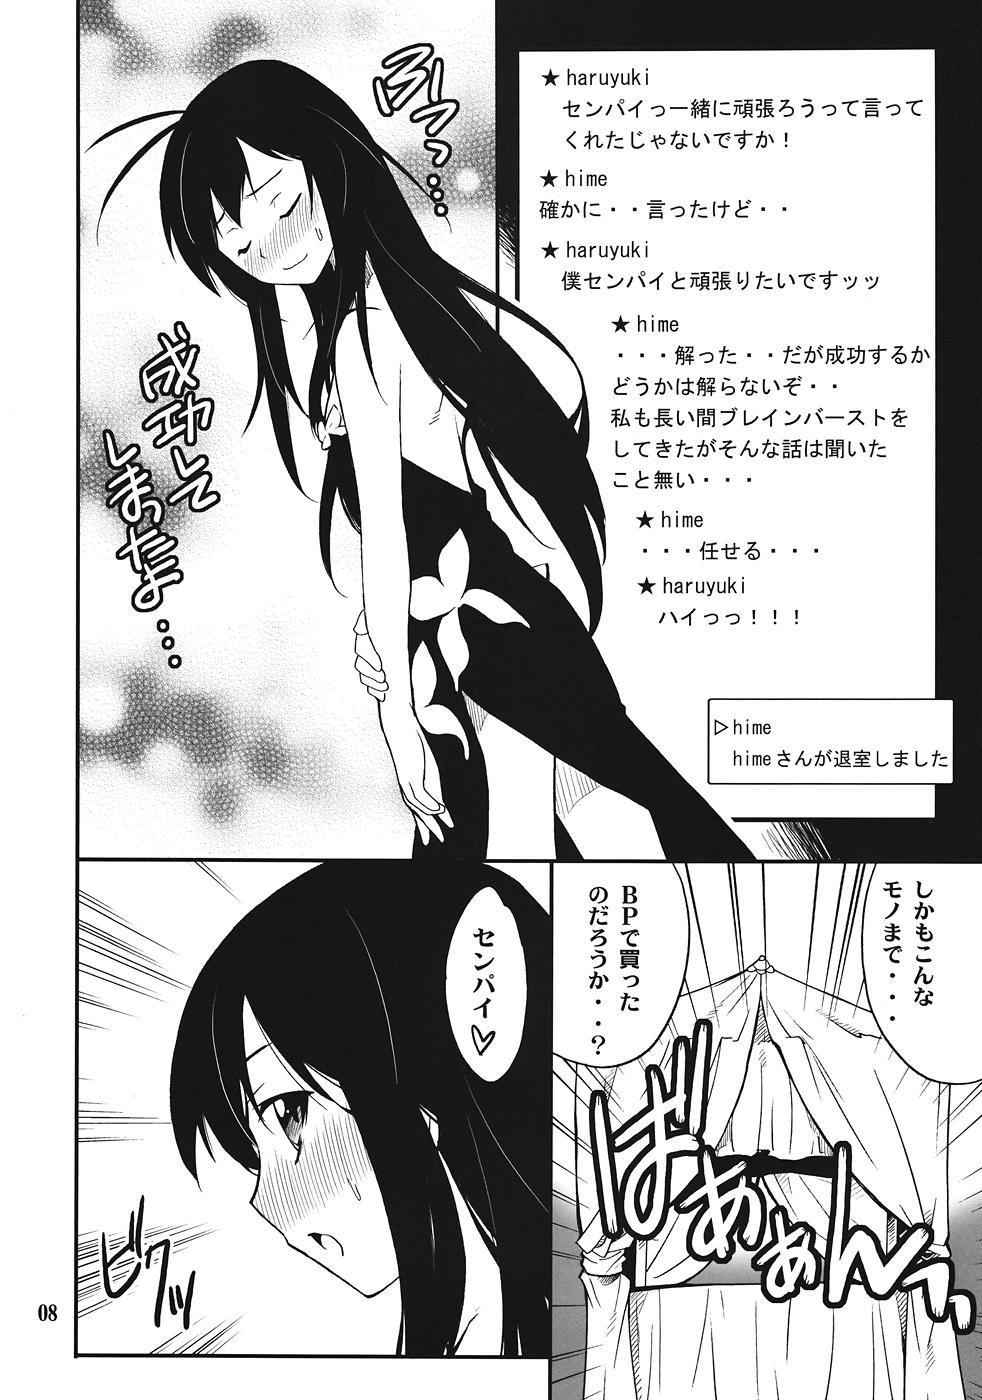 Stunning Another World - Accel world Free - Page 7